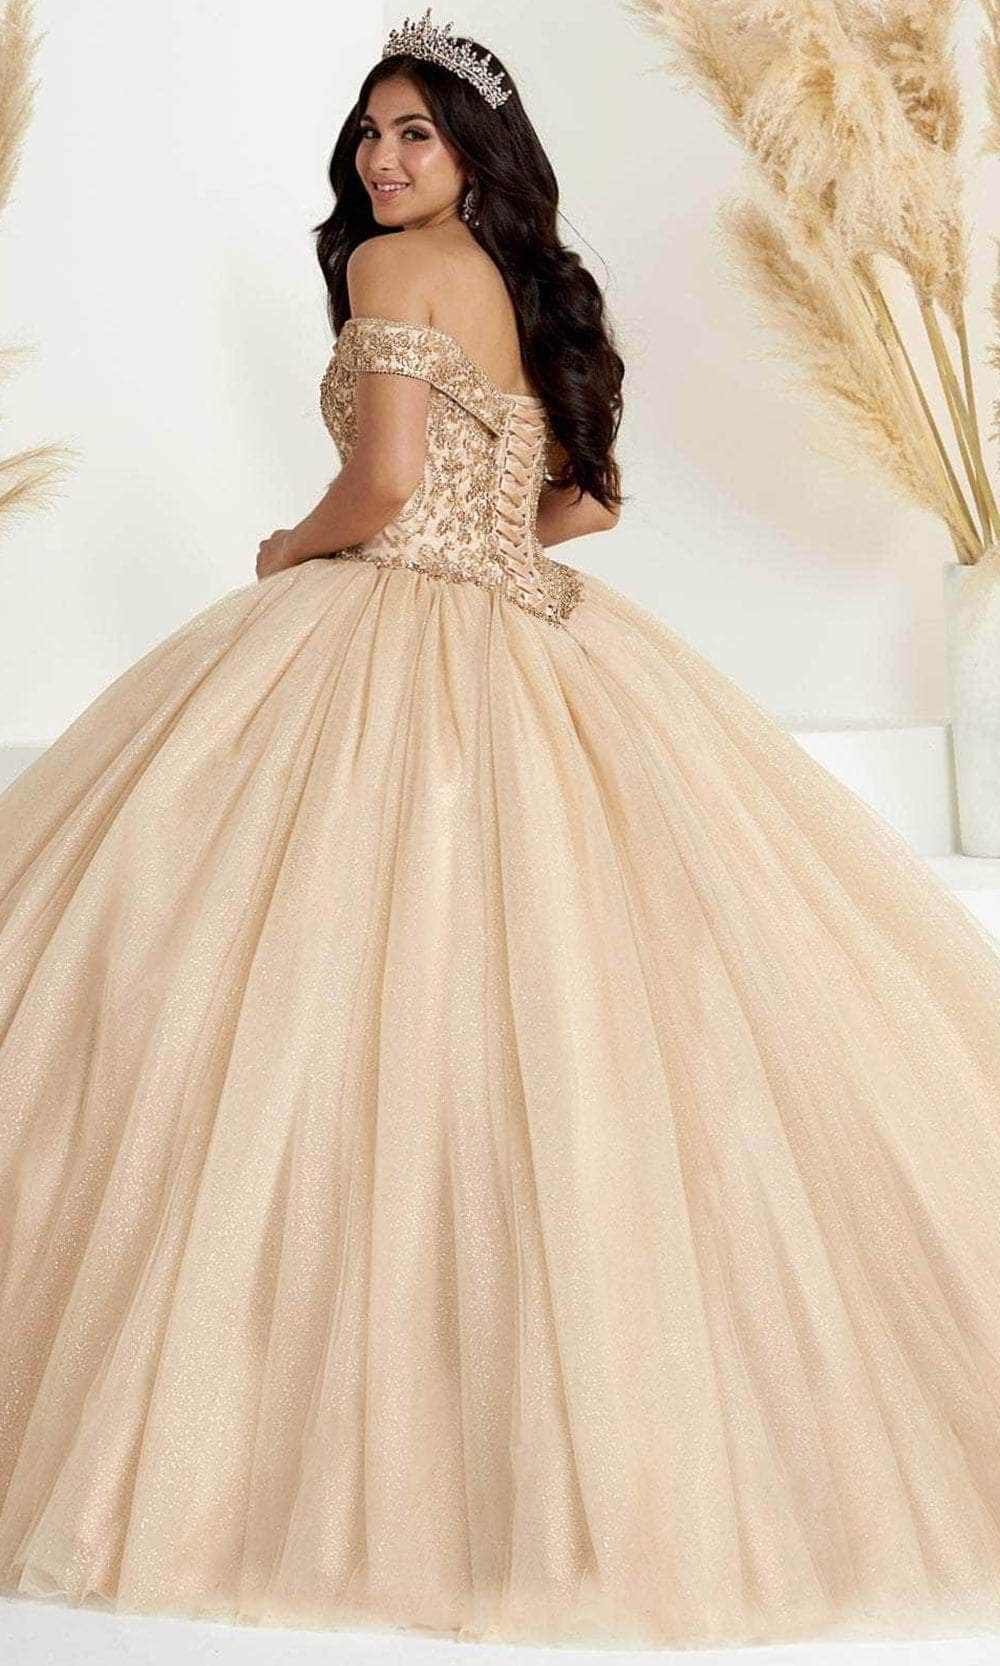 Fiesta Gowns 56446 - Shimmering Off-shoulder Ballgown Special Occasion Dress